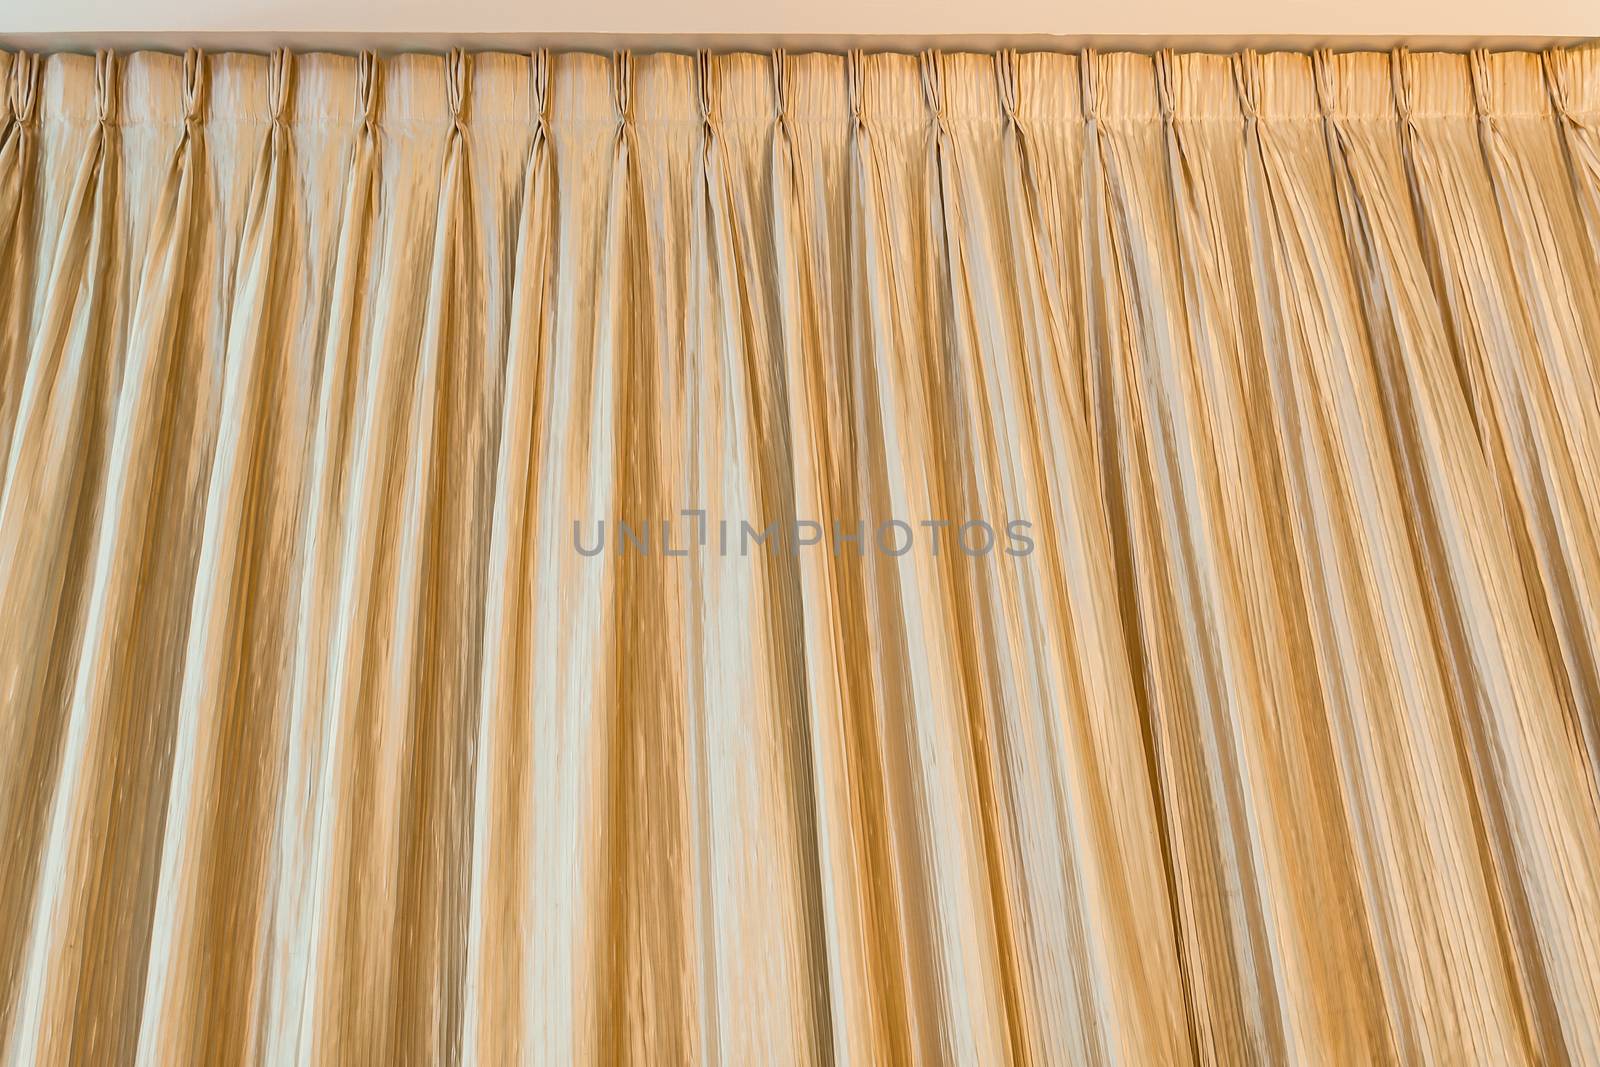 golden curtain on ceiling